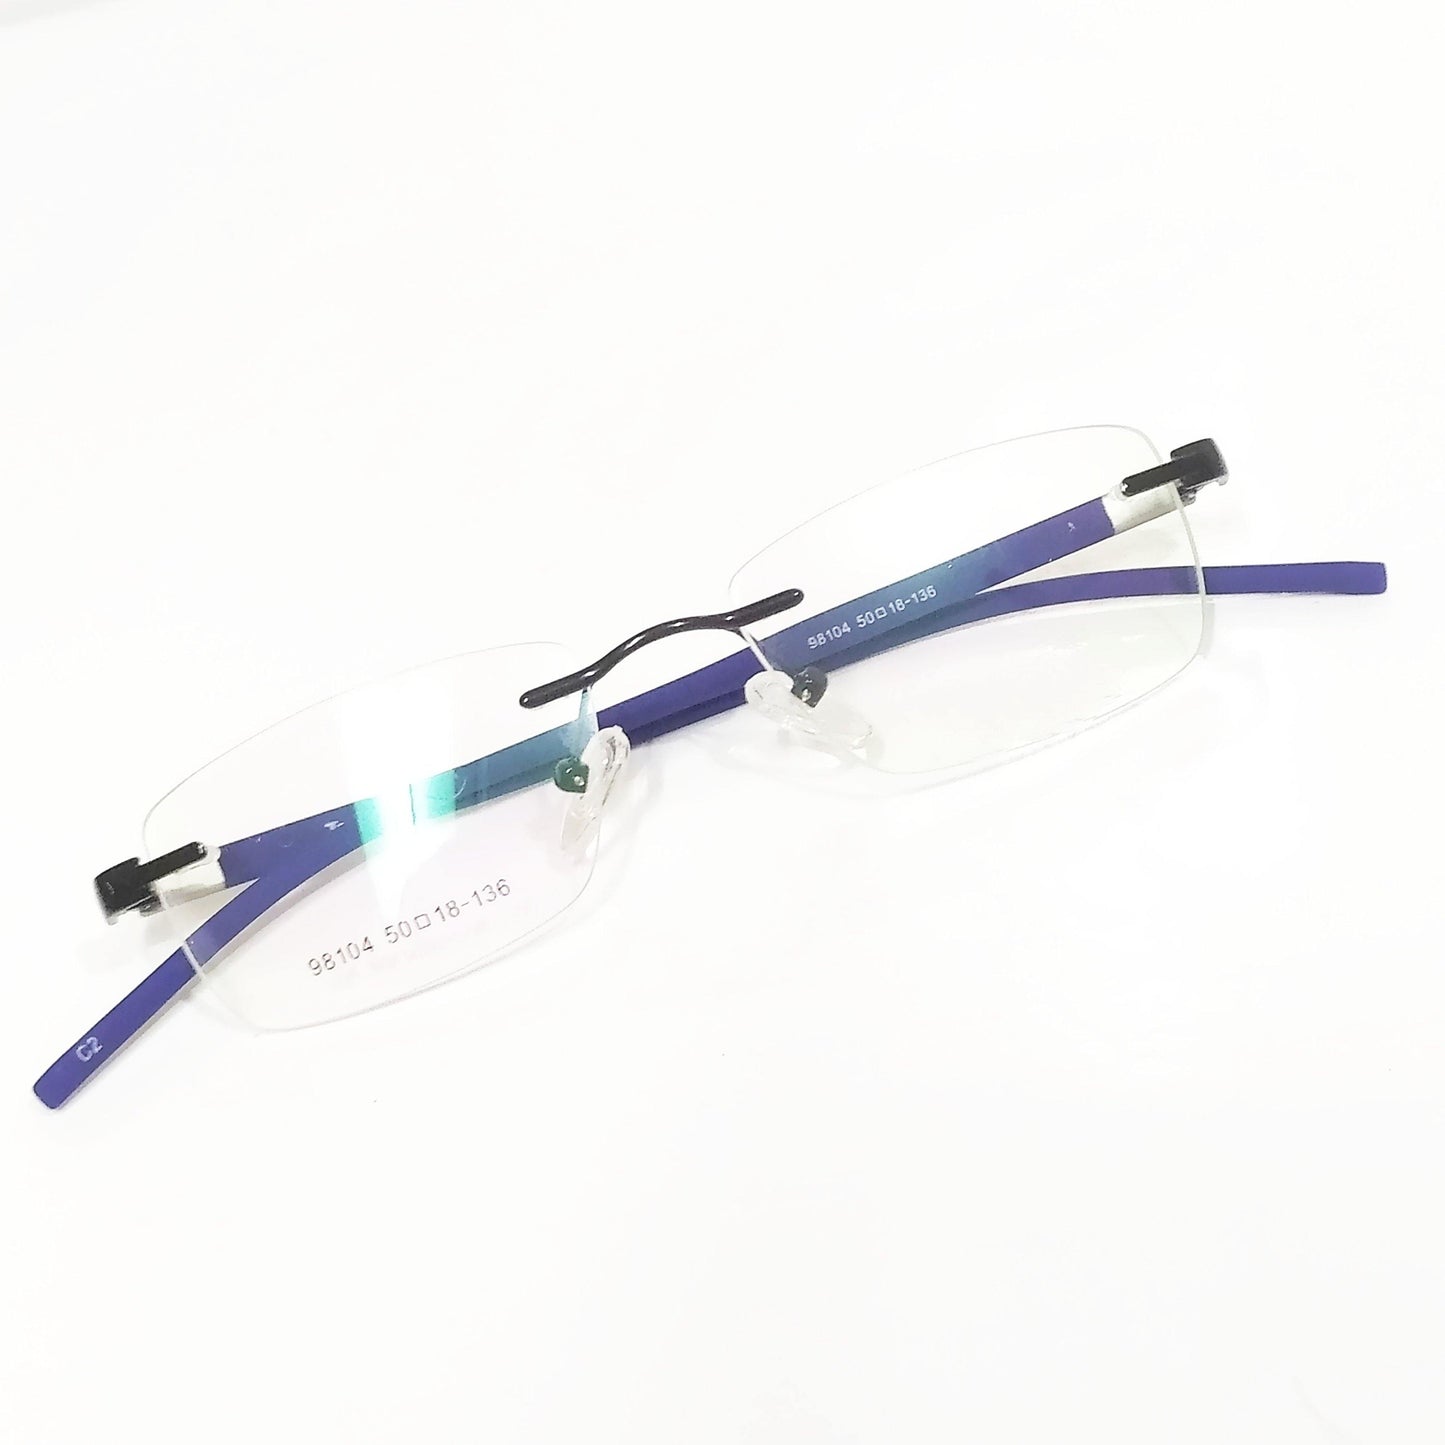 Buy DG Blue Rimless Spectacle Frame Glasses - Glasses India Online in India